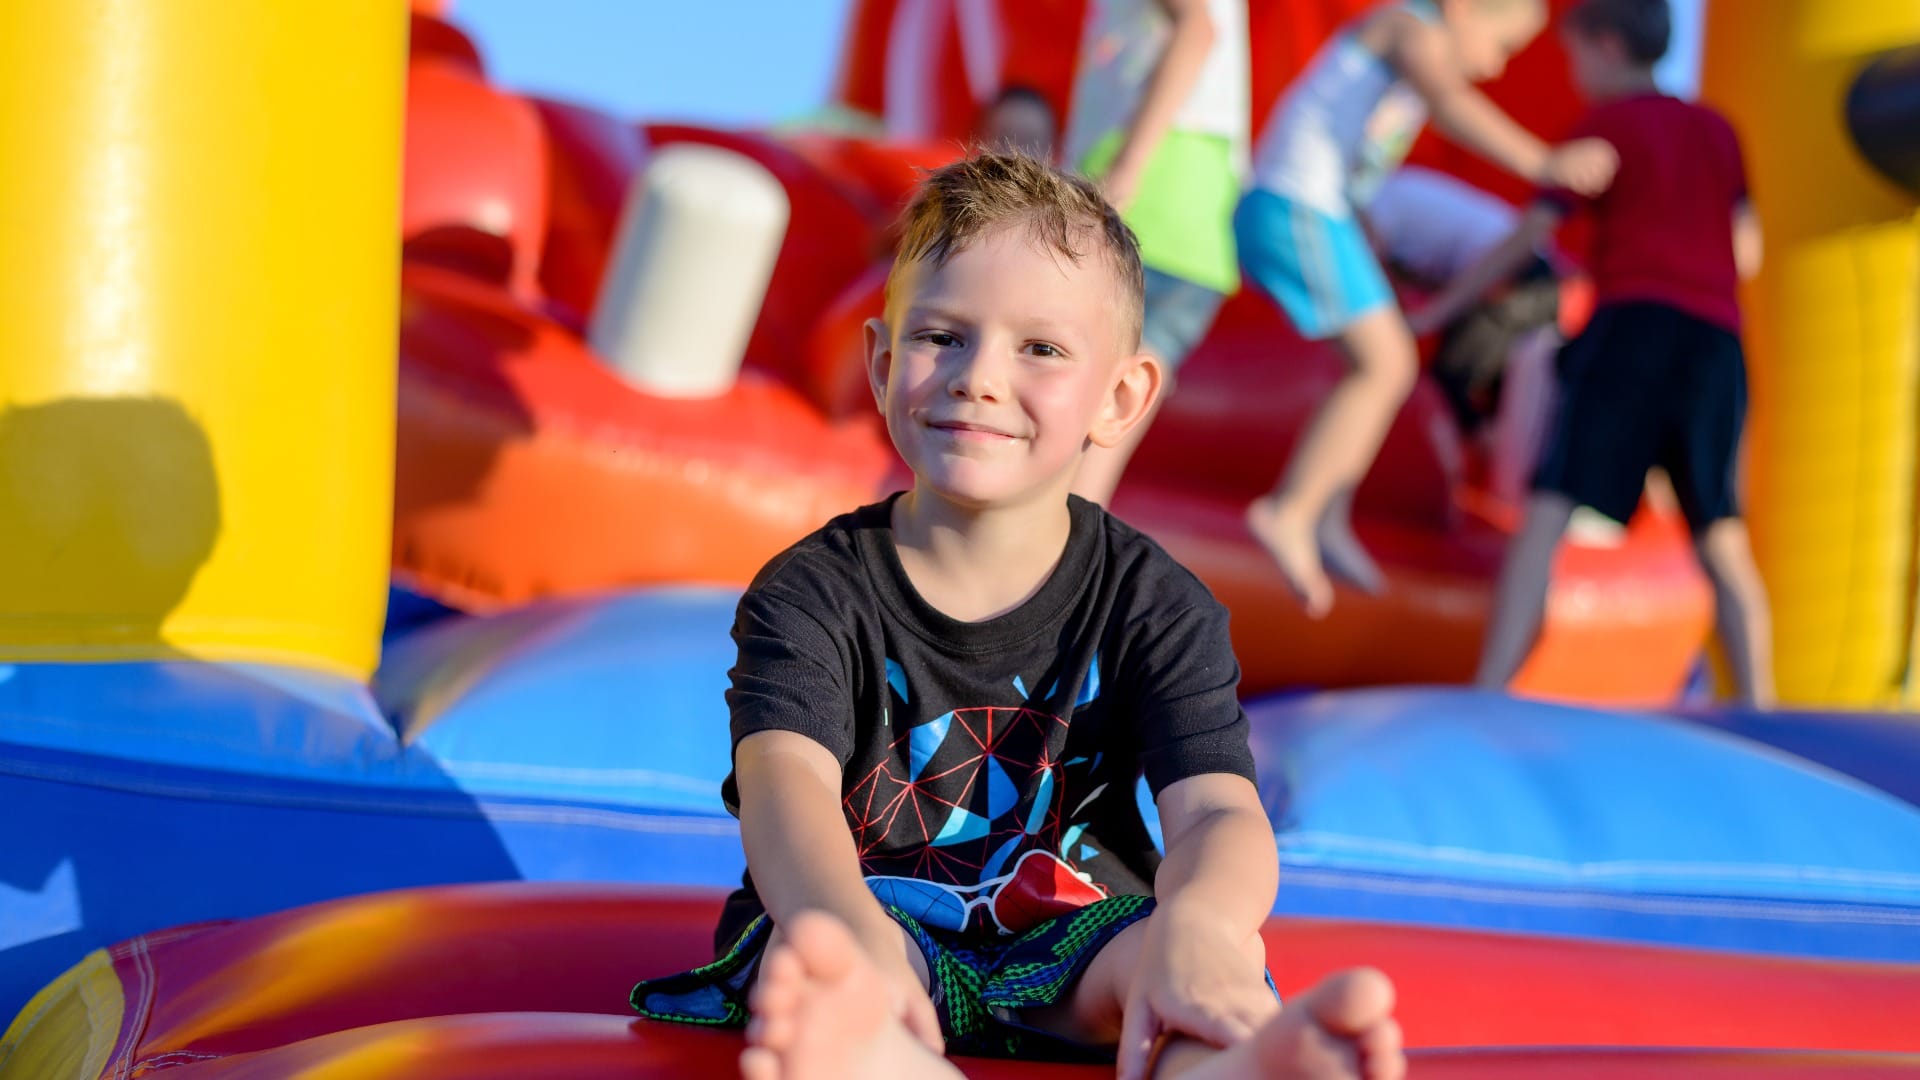 Smiling little boy sitting on a jumping castle